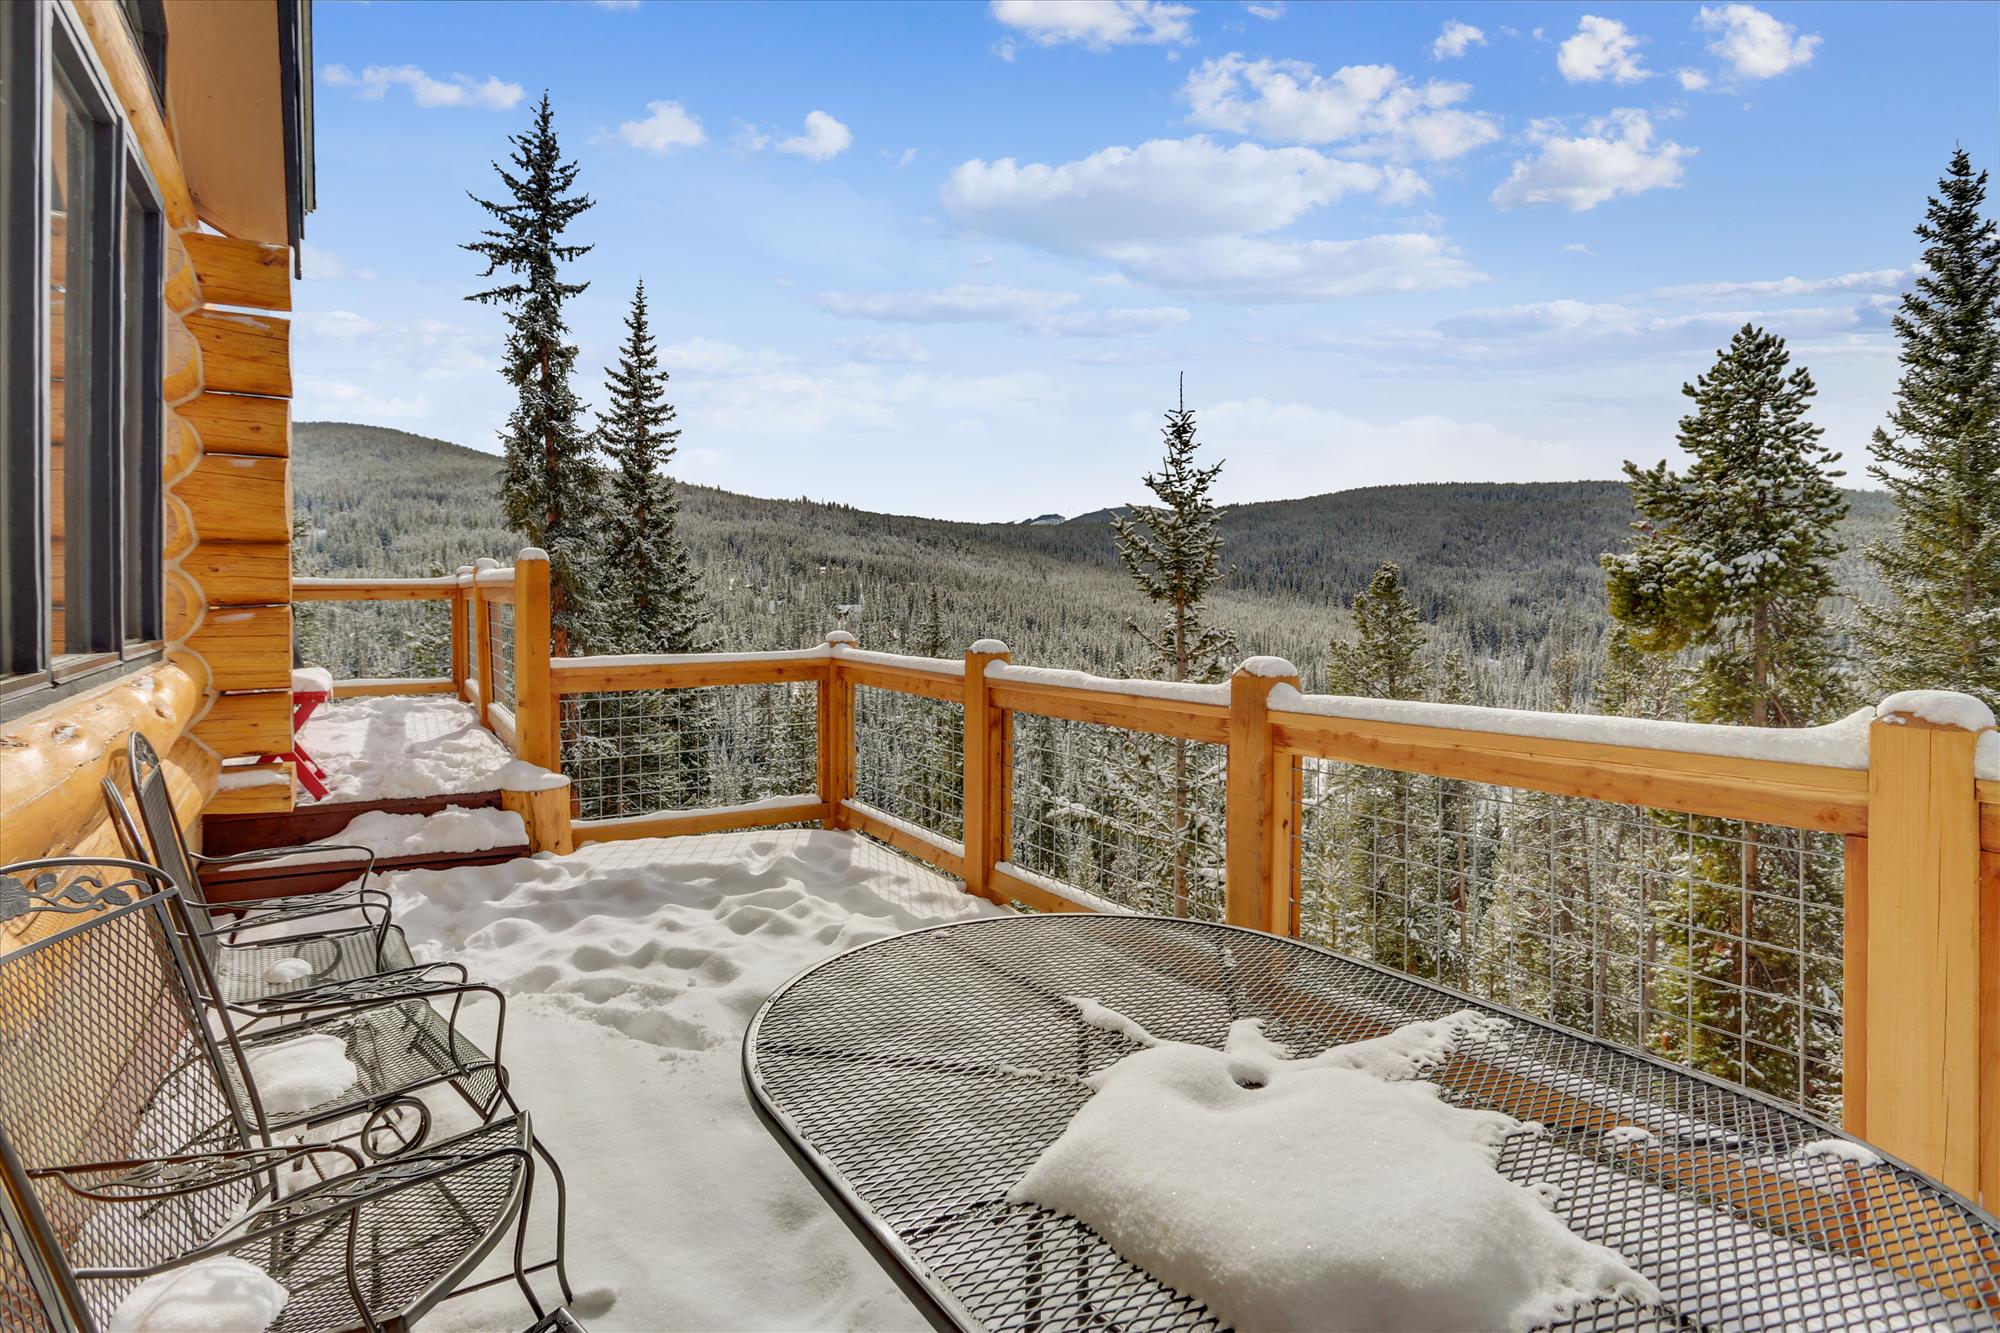 There is no shortage of magnificent views from this home - 10 Southface Breckenridge Vacation Rental